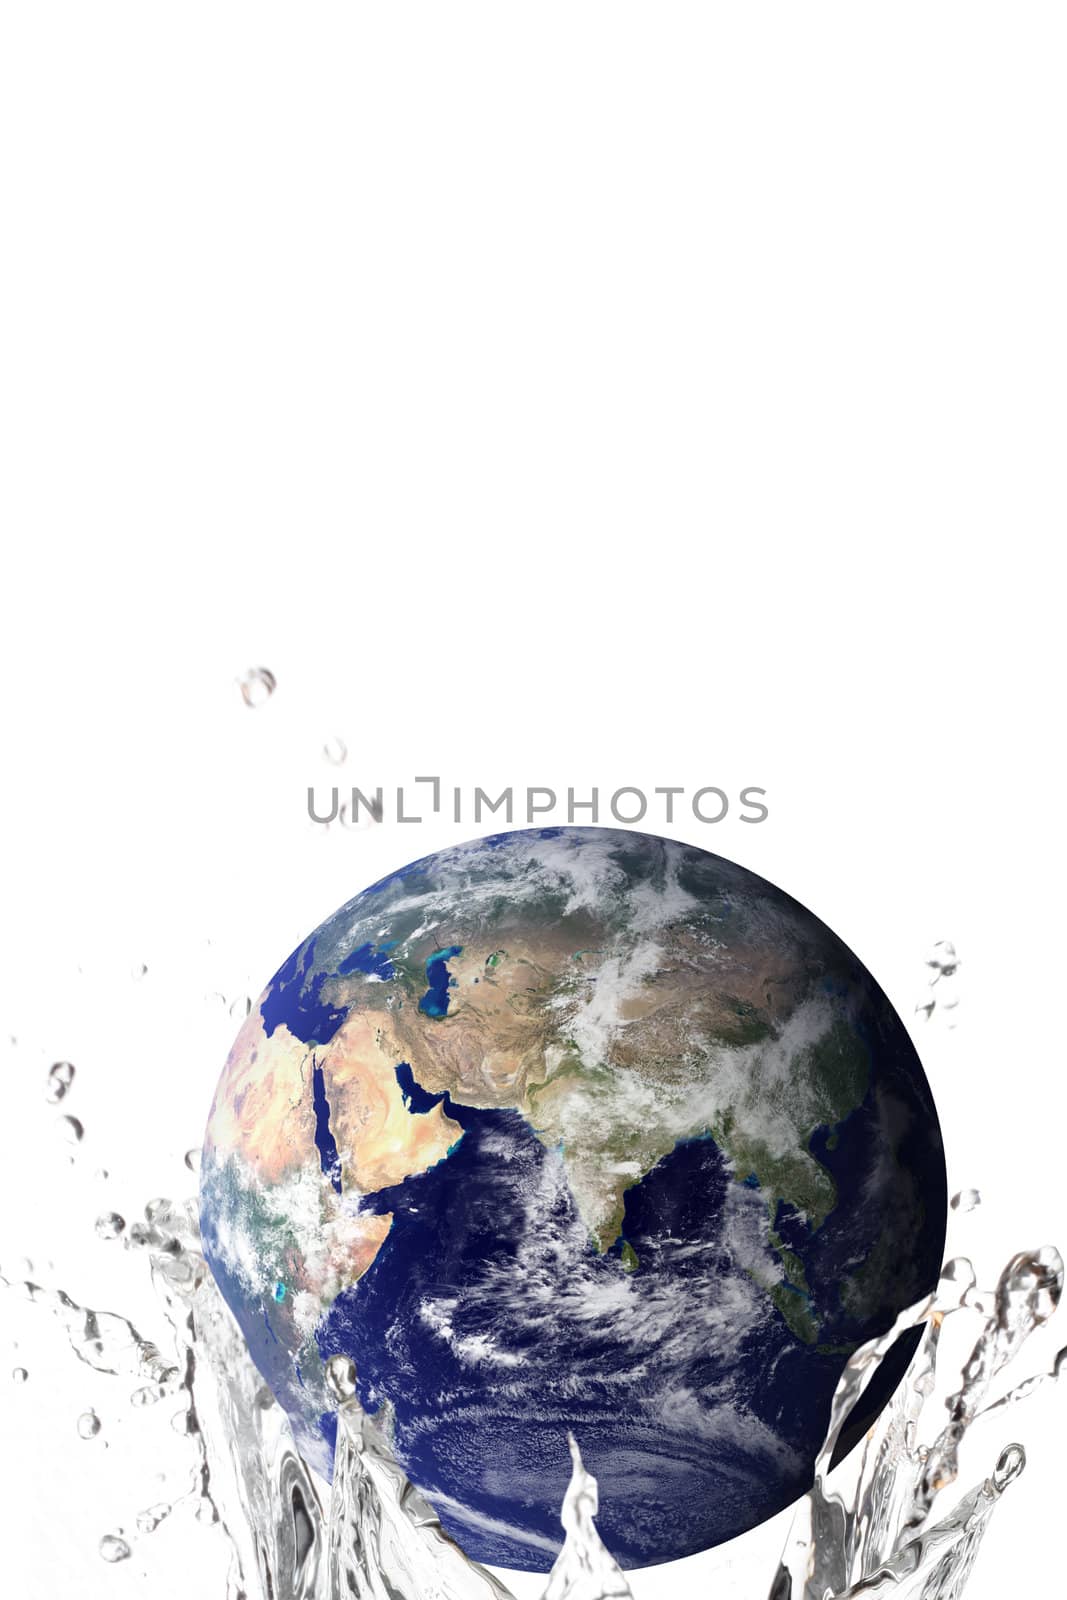 Water resources on Earth